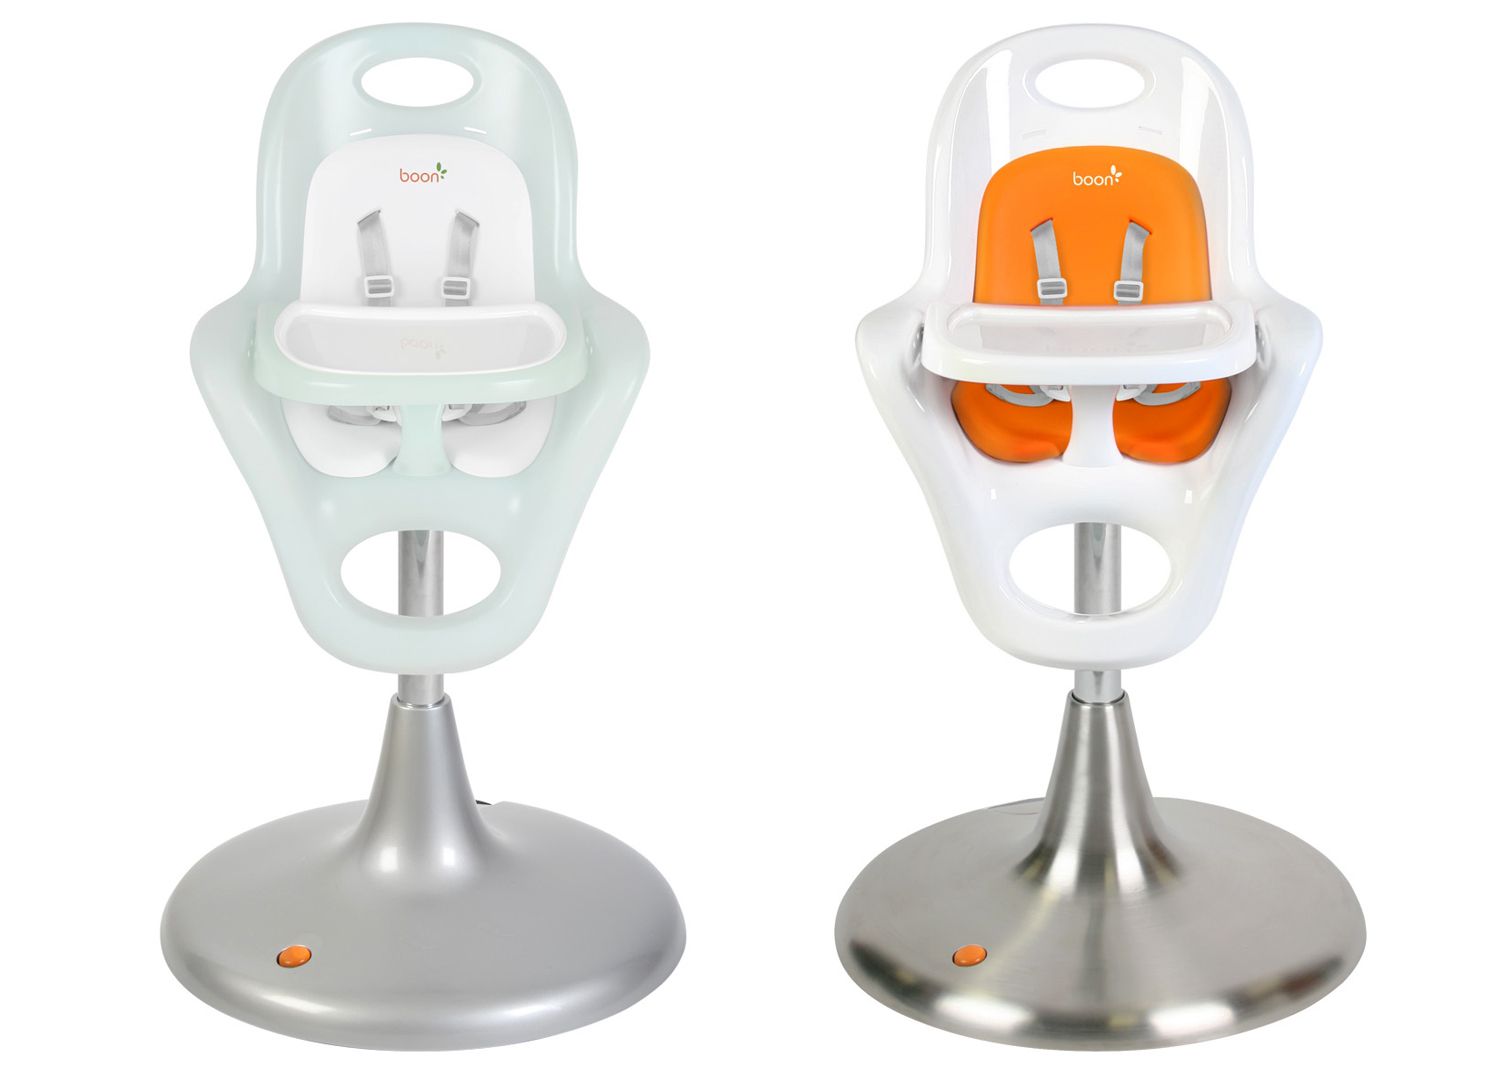 Why Was The Boon High Chair Discontinued?